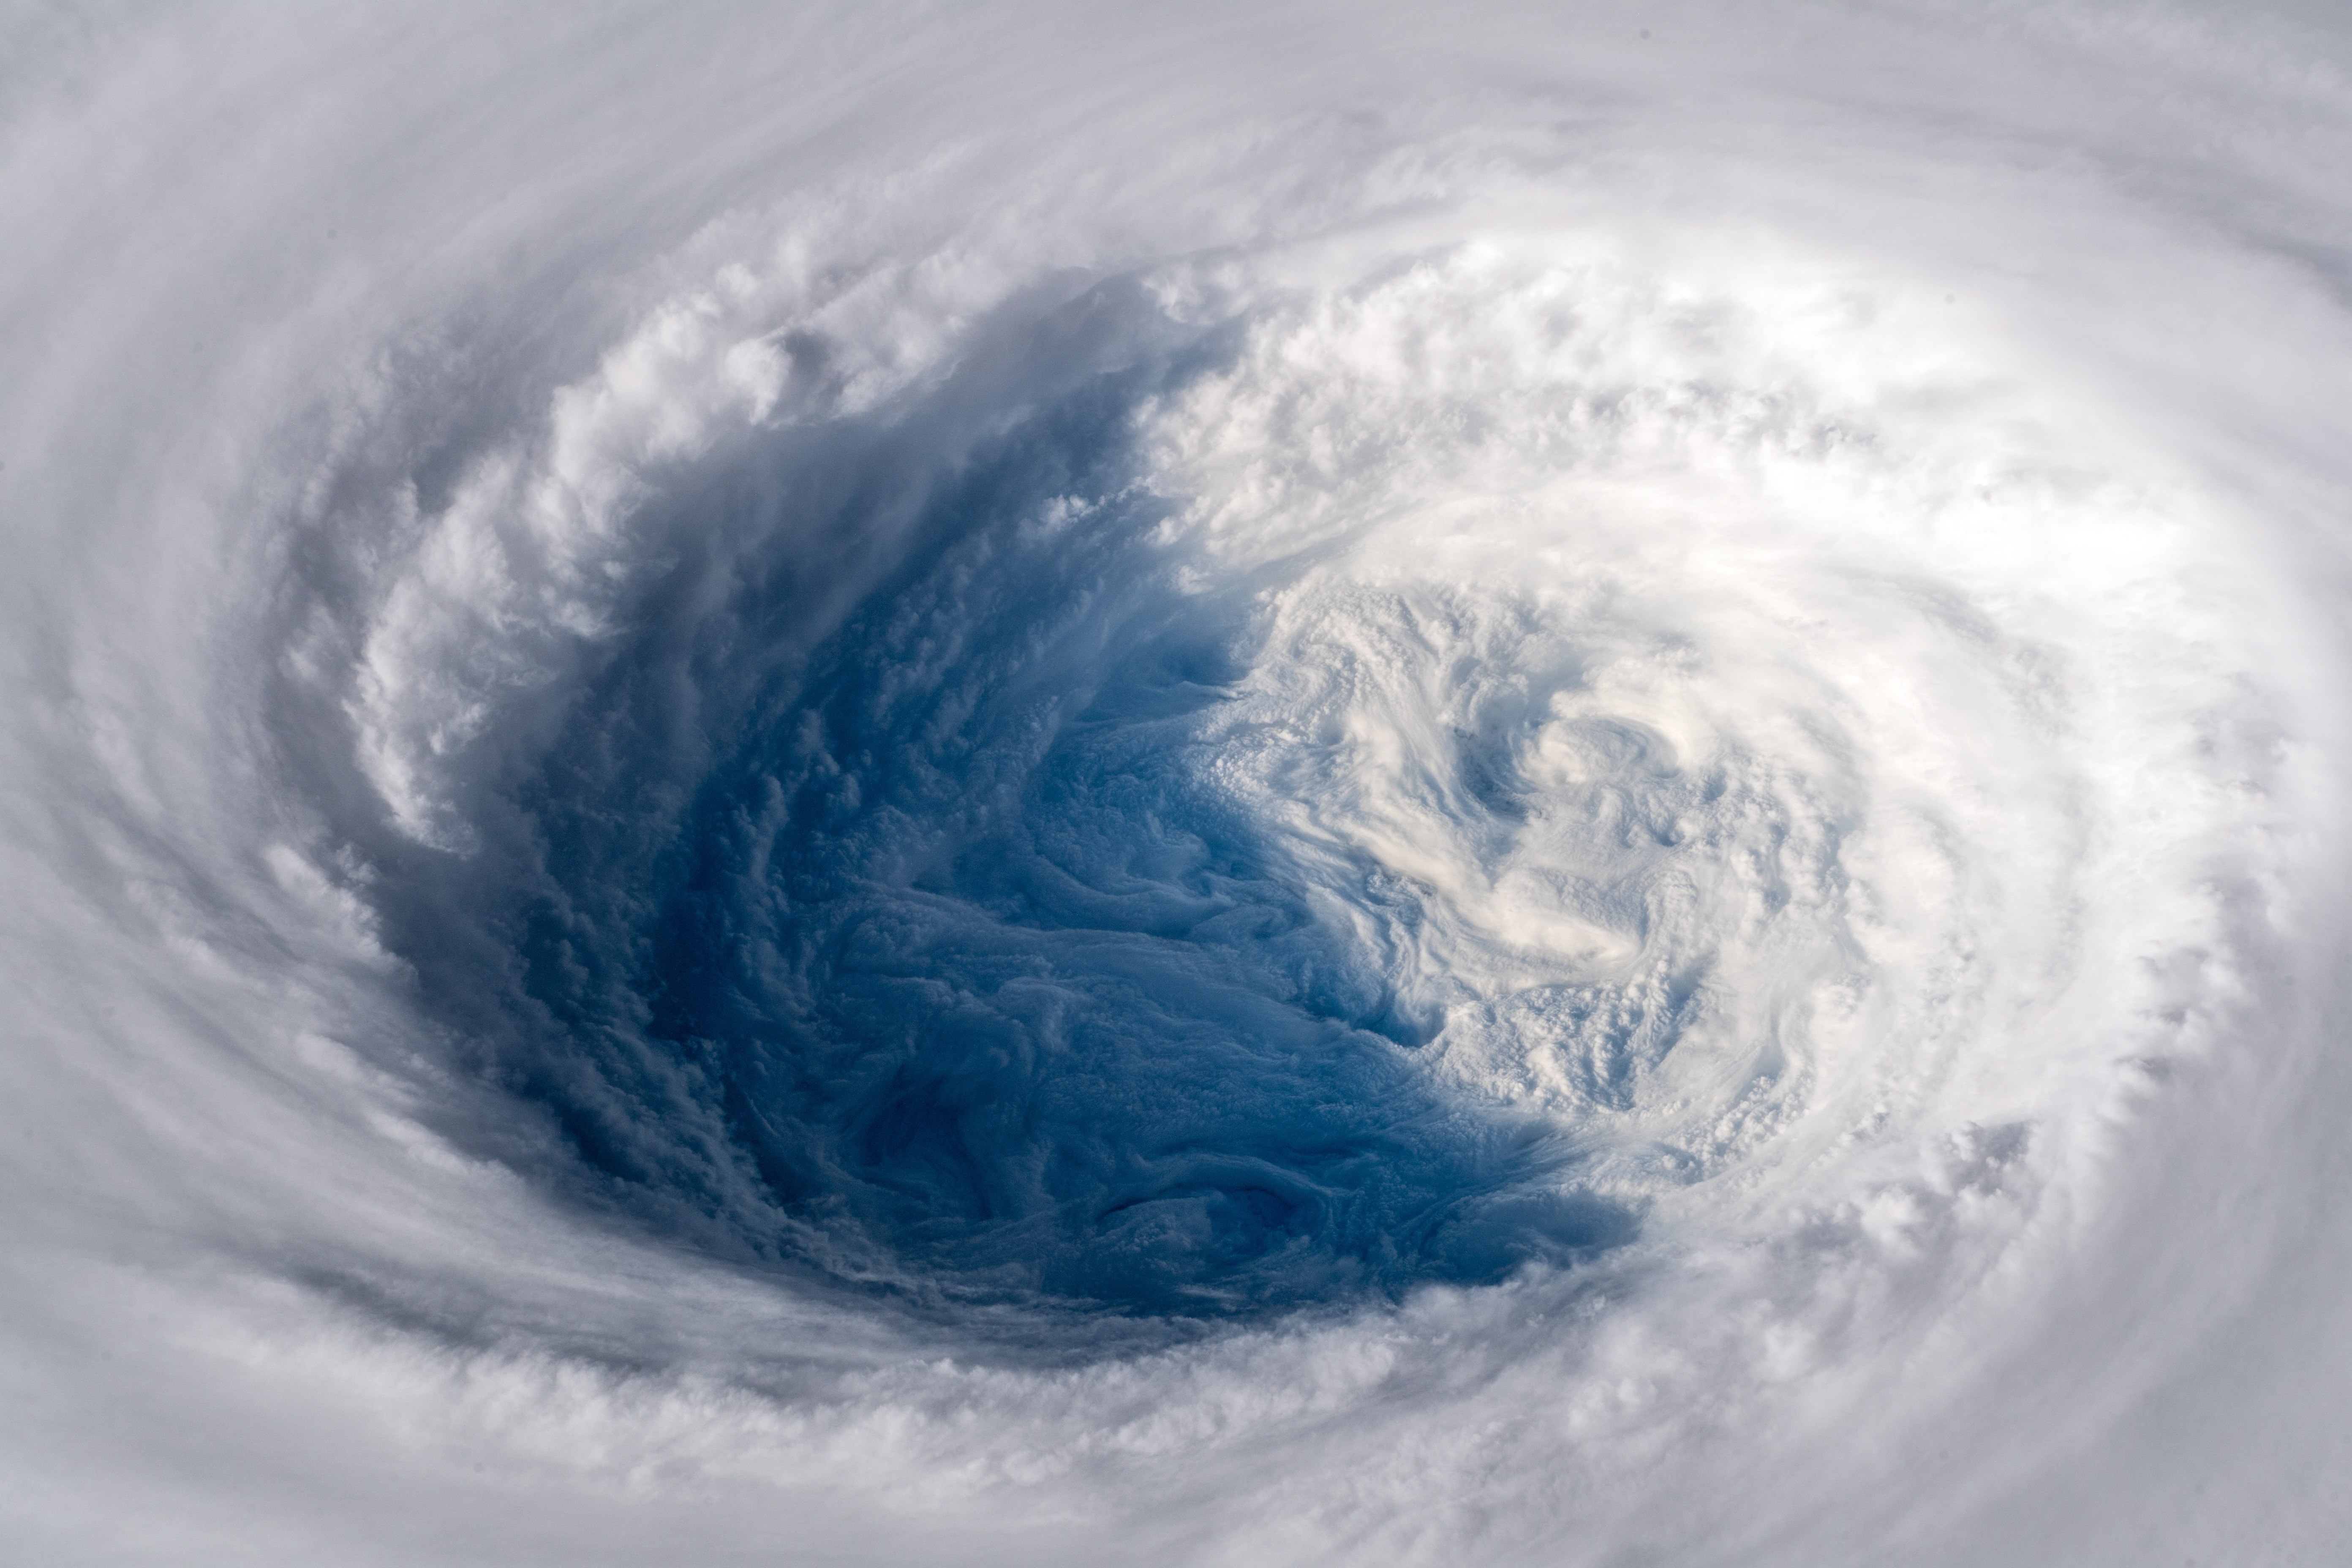 epa07048928 A handout photo made available by Germany's European Space Agency (ESA) astronaut Alexander Gerst on his Flickr site shows a view onto the 'eye' of Supertyphoon Trami as seen from the International Space Stateion ISS on 25 September 2018 (issued 26 September 2018. Gerst posted the image with a comment: 'As if somebody pulled the planet's gigantic plug. Staring down the eye of yet another fierce storm. Category 5 Super Typhoon Trami is unstoppable and heading for Japan and Taiwan. Be safe down there!' The typhoon is expected to make landfall in Japan on Sunday, 30 September 2018.  EPA/ALEXANDER GERST / HANDOUT MANDATORY CREDIT: ESA/NASA - ALEXANDER GERST HANDOUT EDITORIAL USE ONLY/NO SALES